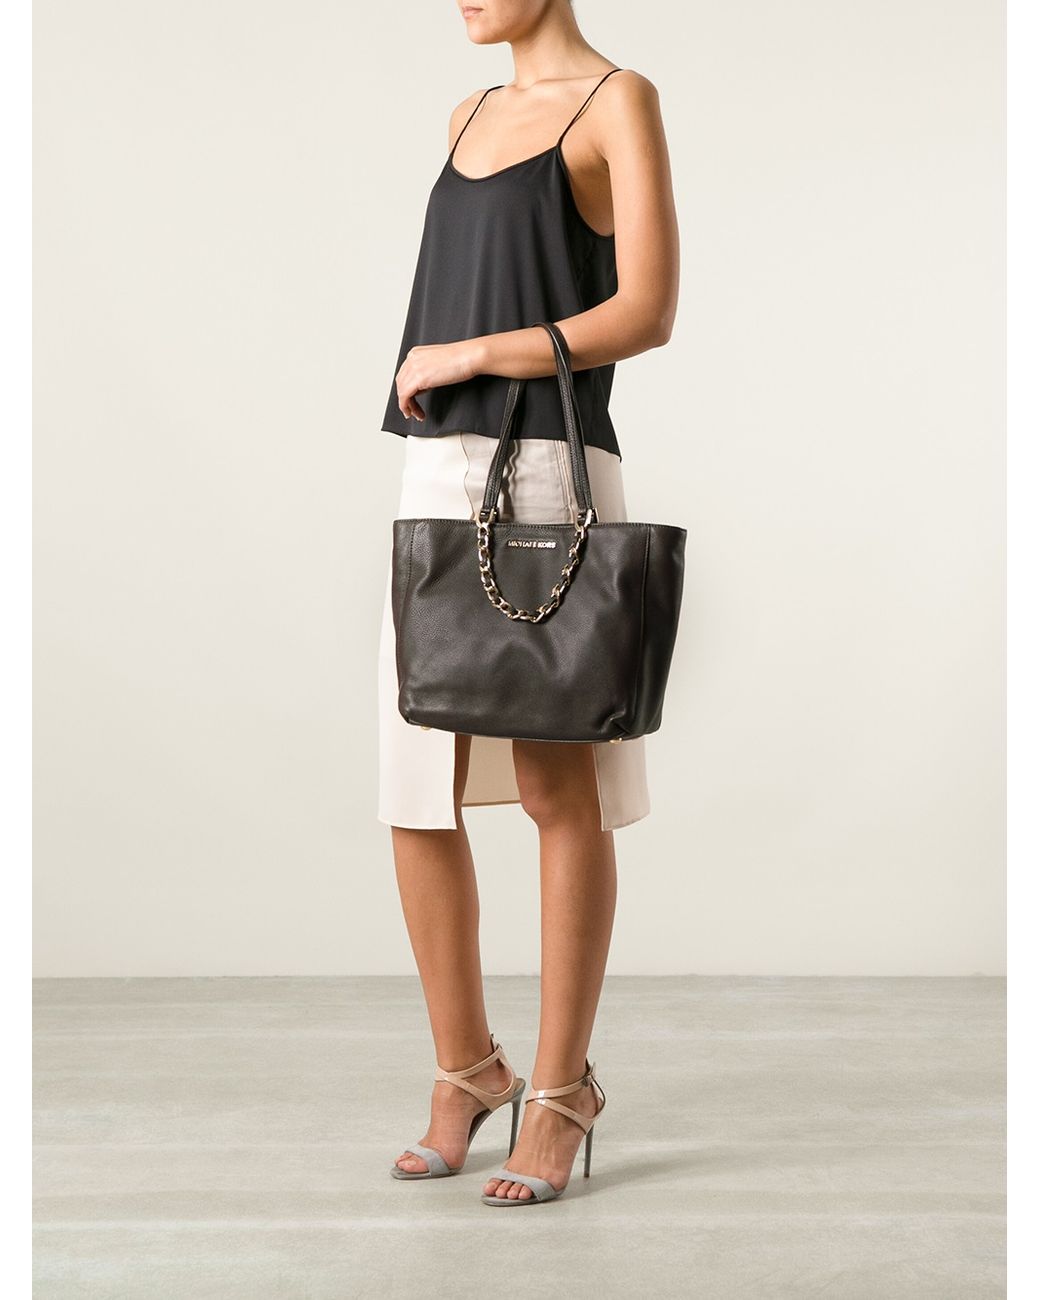 MICHAEL Michael Kors Chain Strap Tote in Brown | Lyst